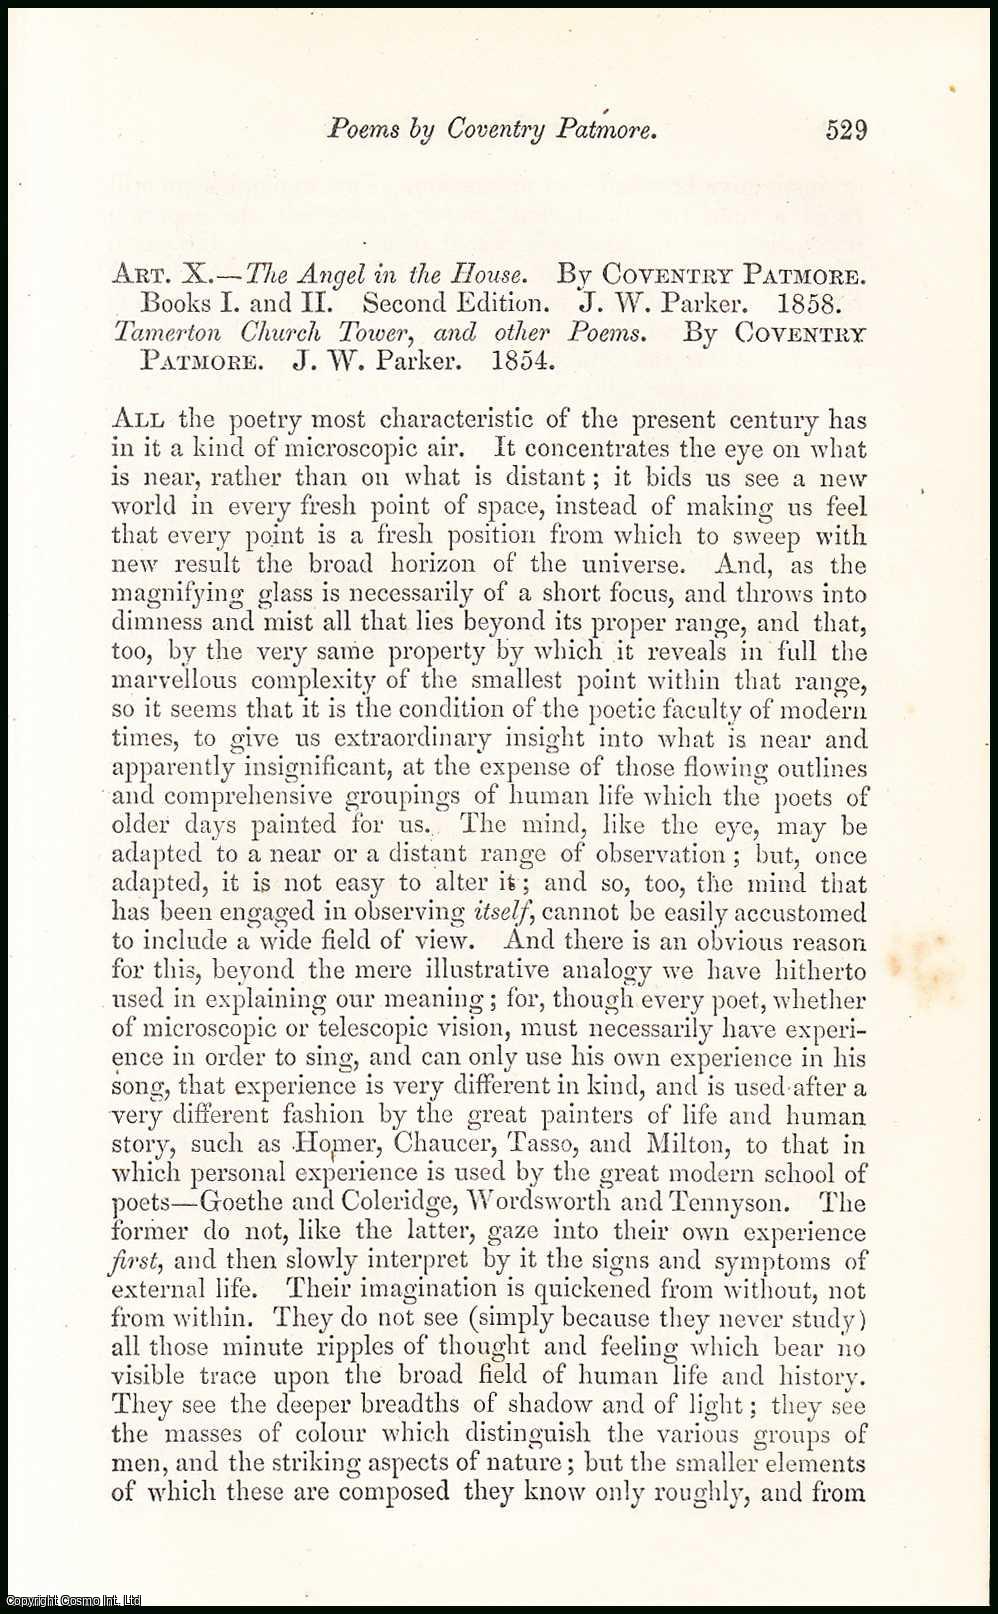 R.H. Hutton - Poems, by Coventry Patmore. An uncommon original article from the North British Review, 1858.